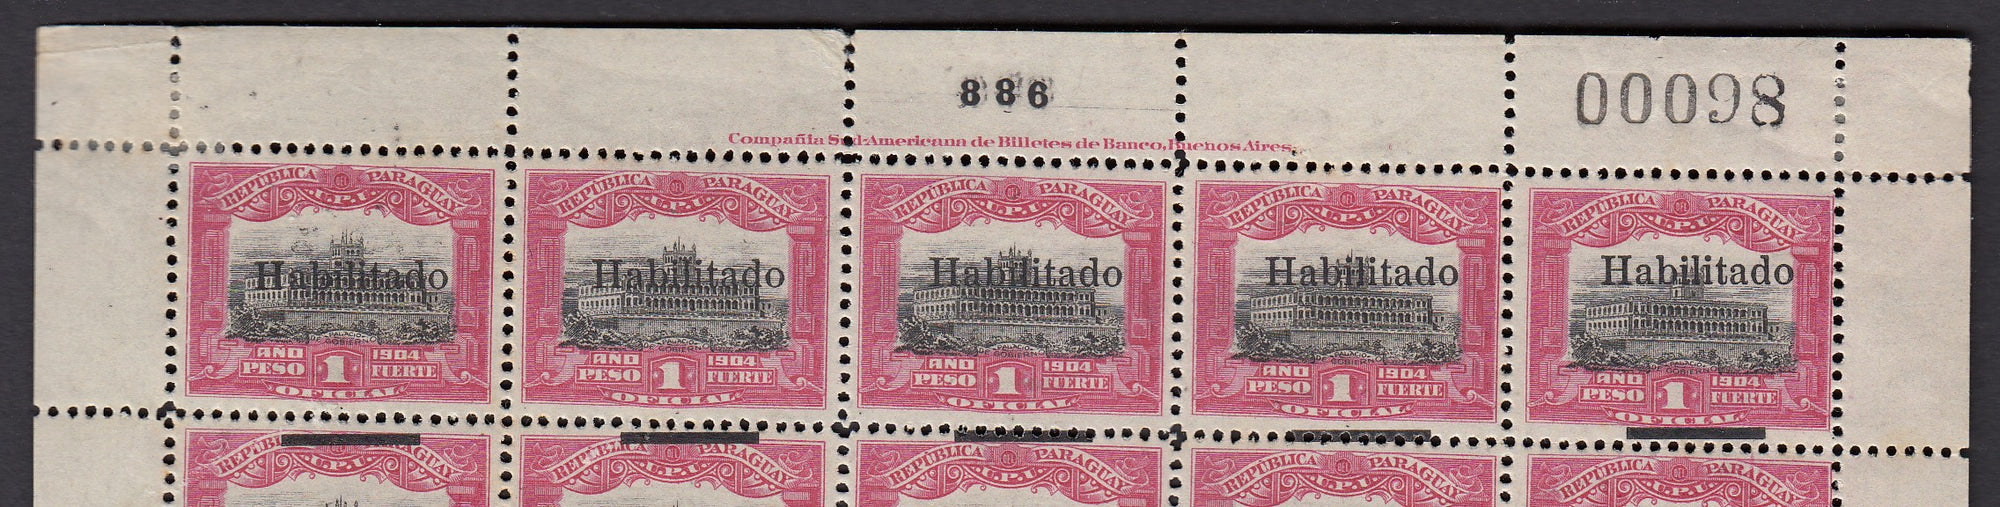 Paraguay 1908 1p Bright Rose & Black Habilitado Overprint Error with Bar Omitted Complete Sheet MNH. Scott 145a